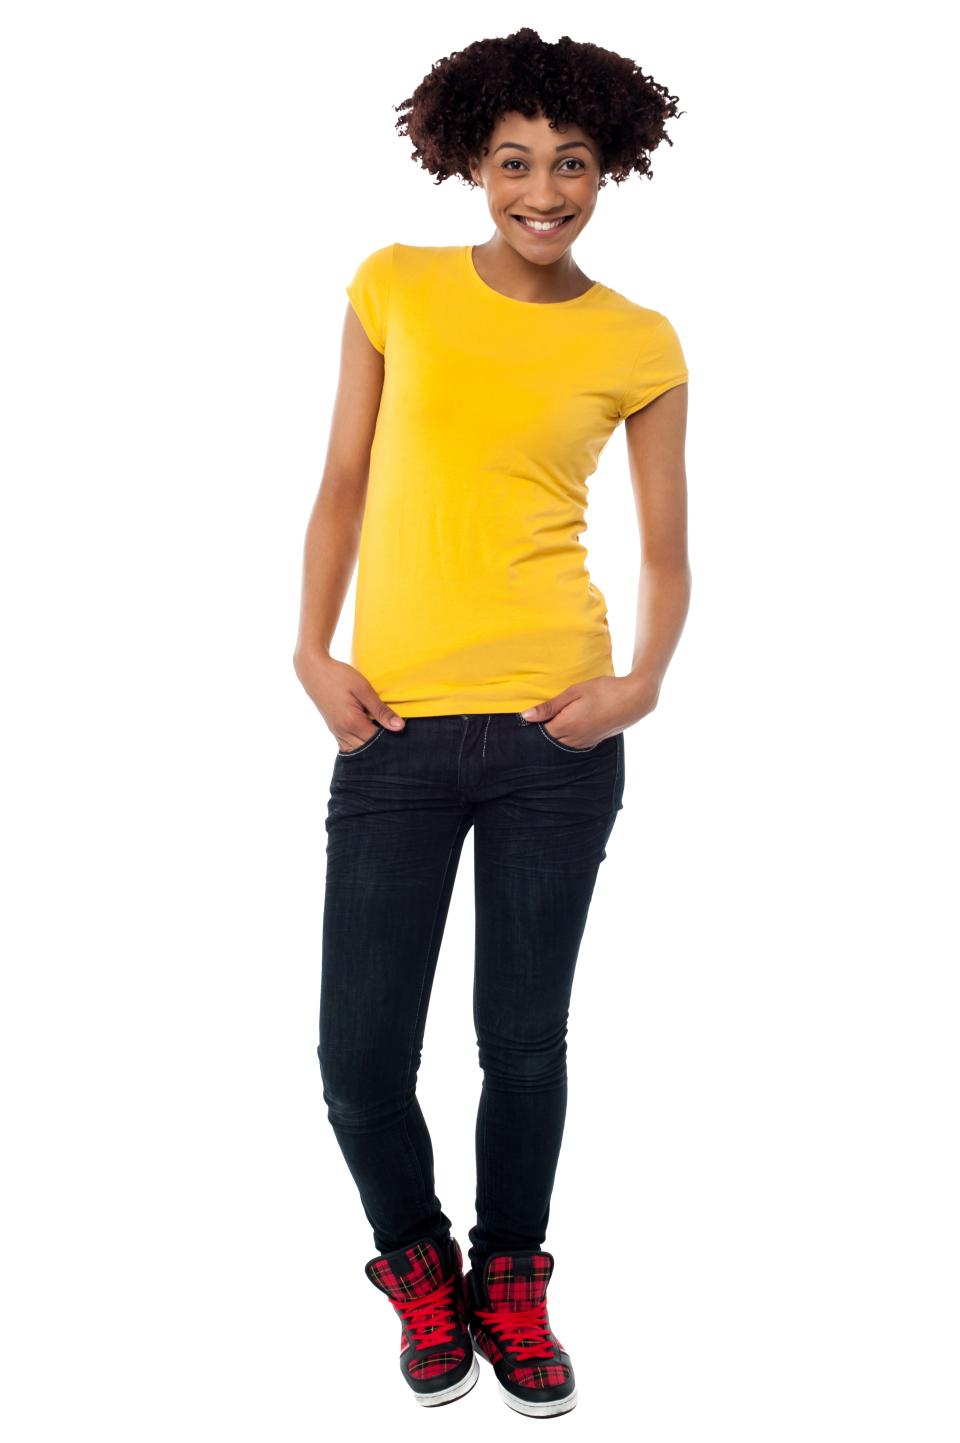 Standing Women PNG Image - PurePNG | Free transparent CC0 PNG Image Library